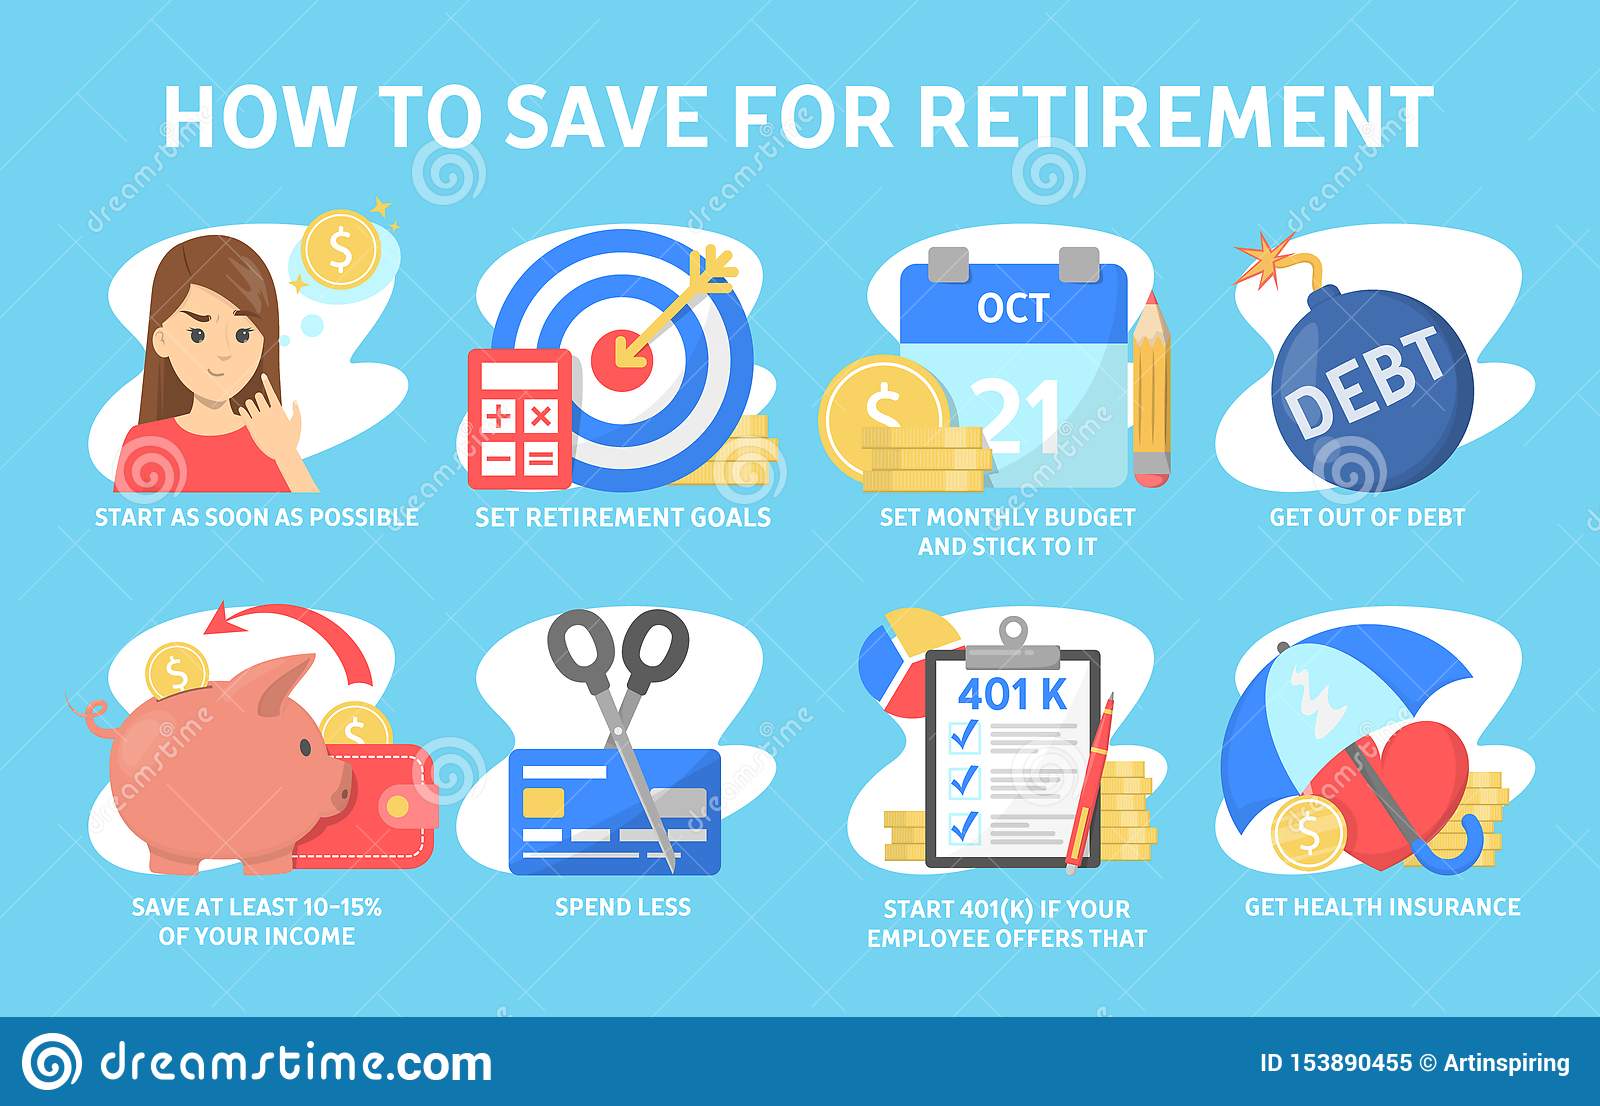 How to Save for Retirement: Useful Tips